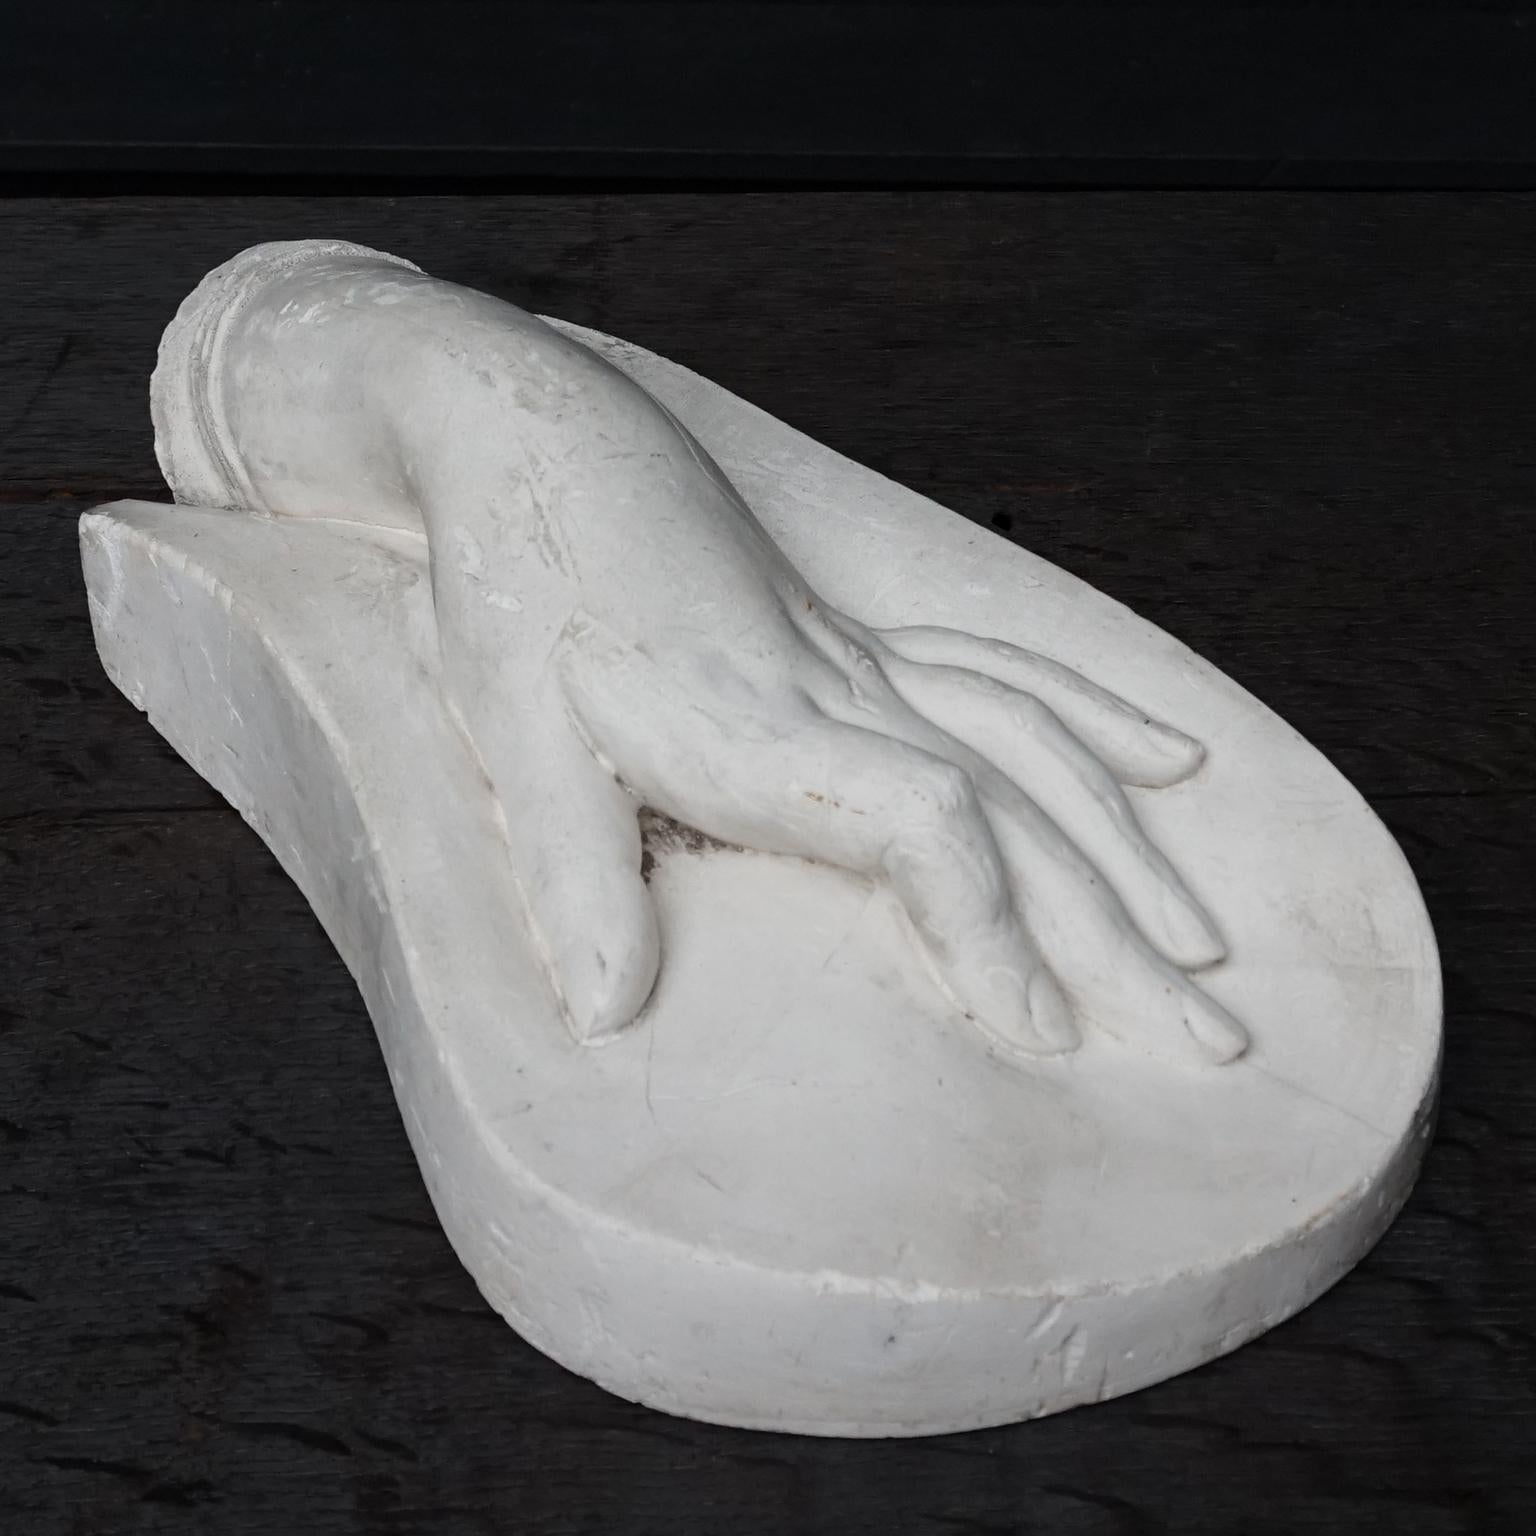 Very elegant Musées Royaux du Cinquantenaire Bruxelles atelier de moulage plaster cast of a woman's left hand, early 20th century.
Decorative piece ready for 'hanging out' or just 'laying around' anywhere you want.

Made somewhere in the first